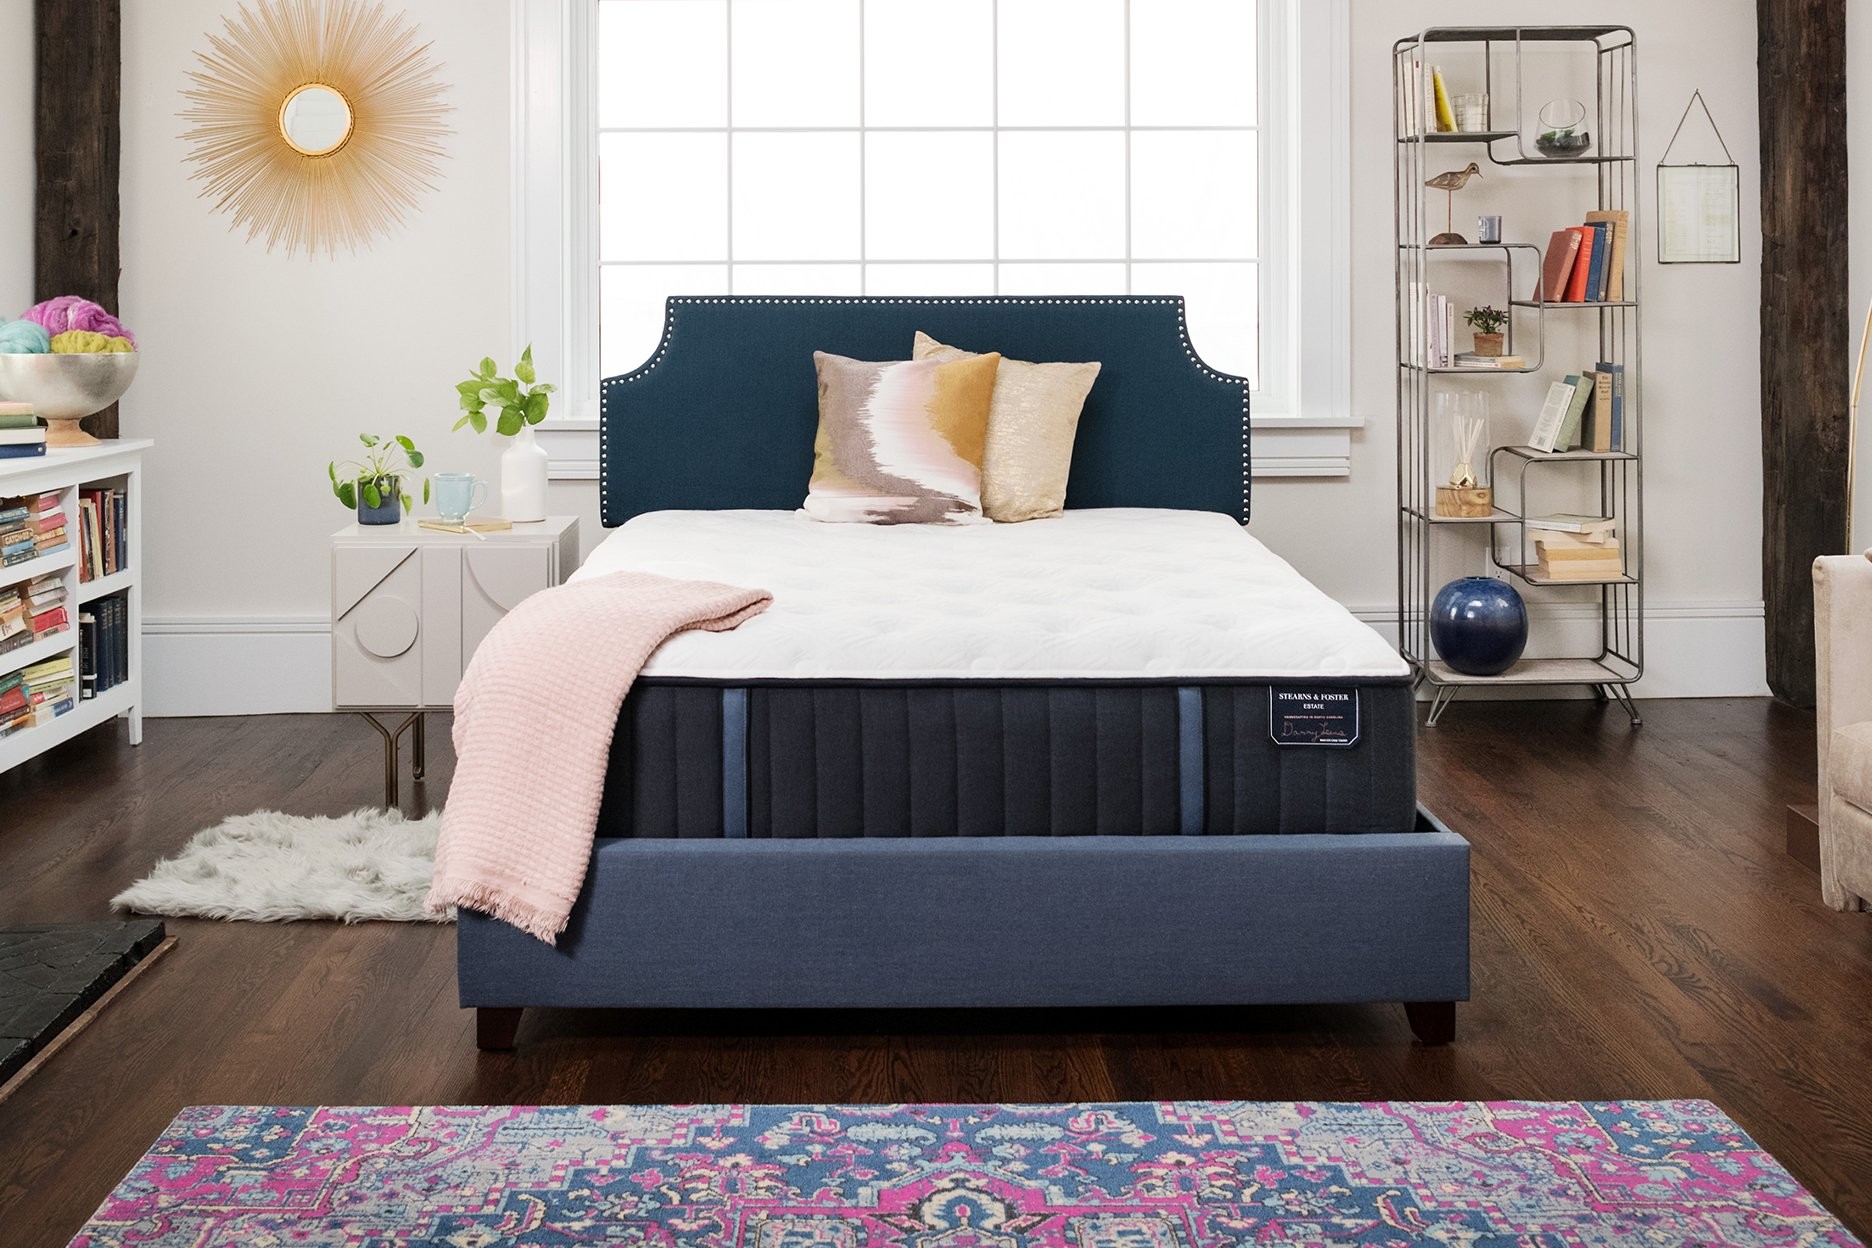 sterns and foster tonya dale queen mattress